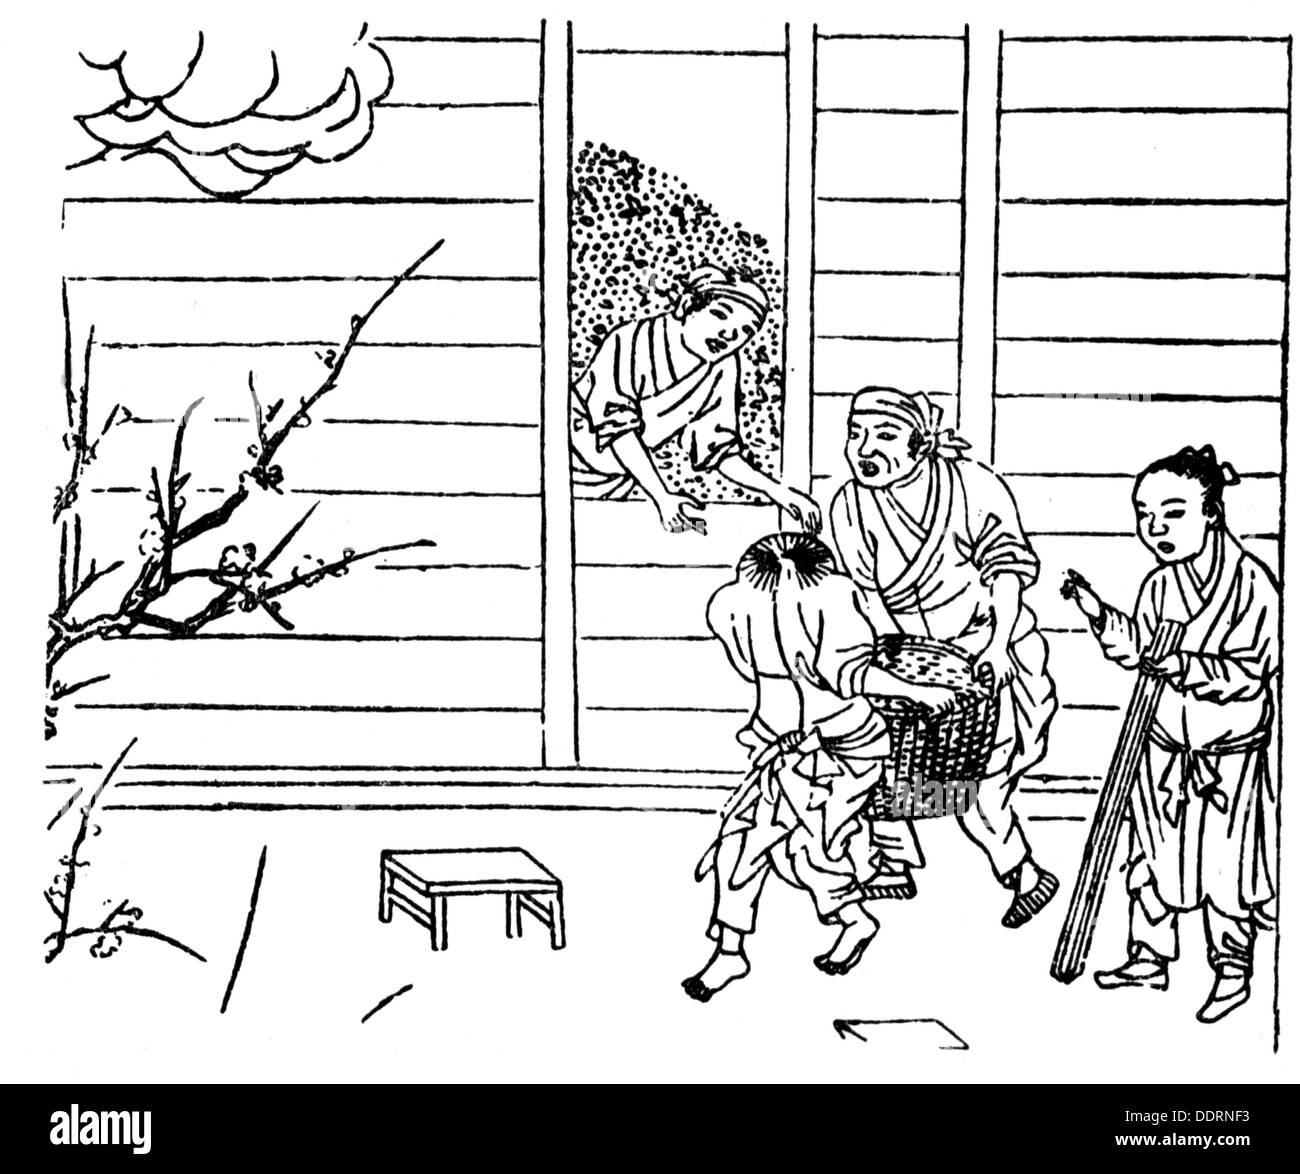 agriculture, rice growing, storing the rice in a hut, wood engraving after Japanese illustration, 19th century, Japan, storage, storages, stores, deposit, deposits, stock of provisions, stock, supply, Japanese, rice farmer, farmer, farmers, people, men, man, working, agricultural work, farm labour, farm labor, Asia, food, foodstuff, agriculture, farming, store, storing, hut, huts, historic, historical, Additional-Rights-Clearences-Not Available Stock Photo